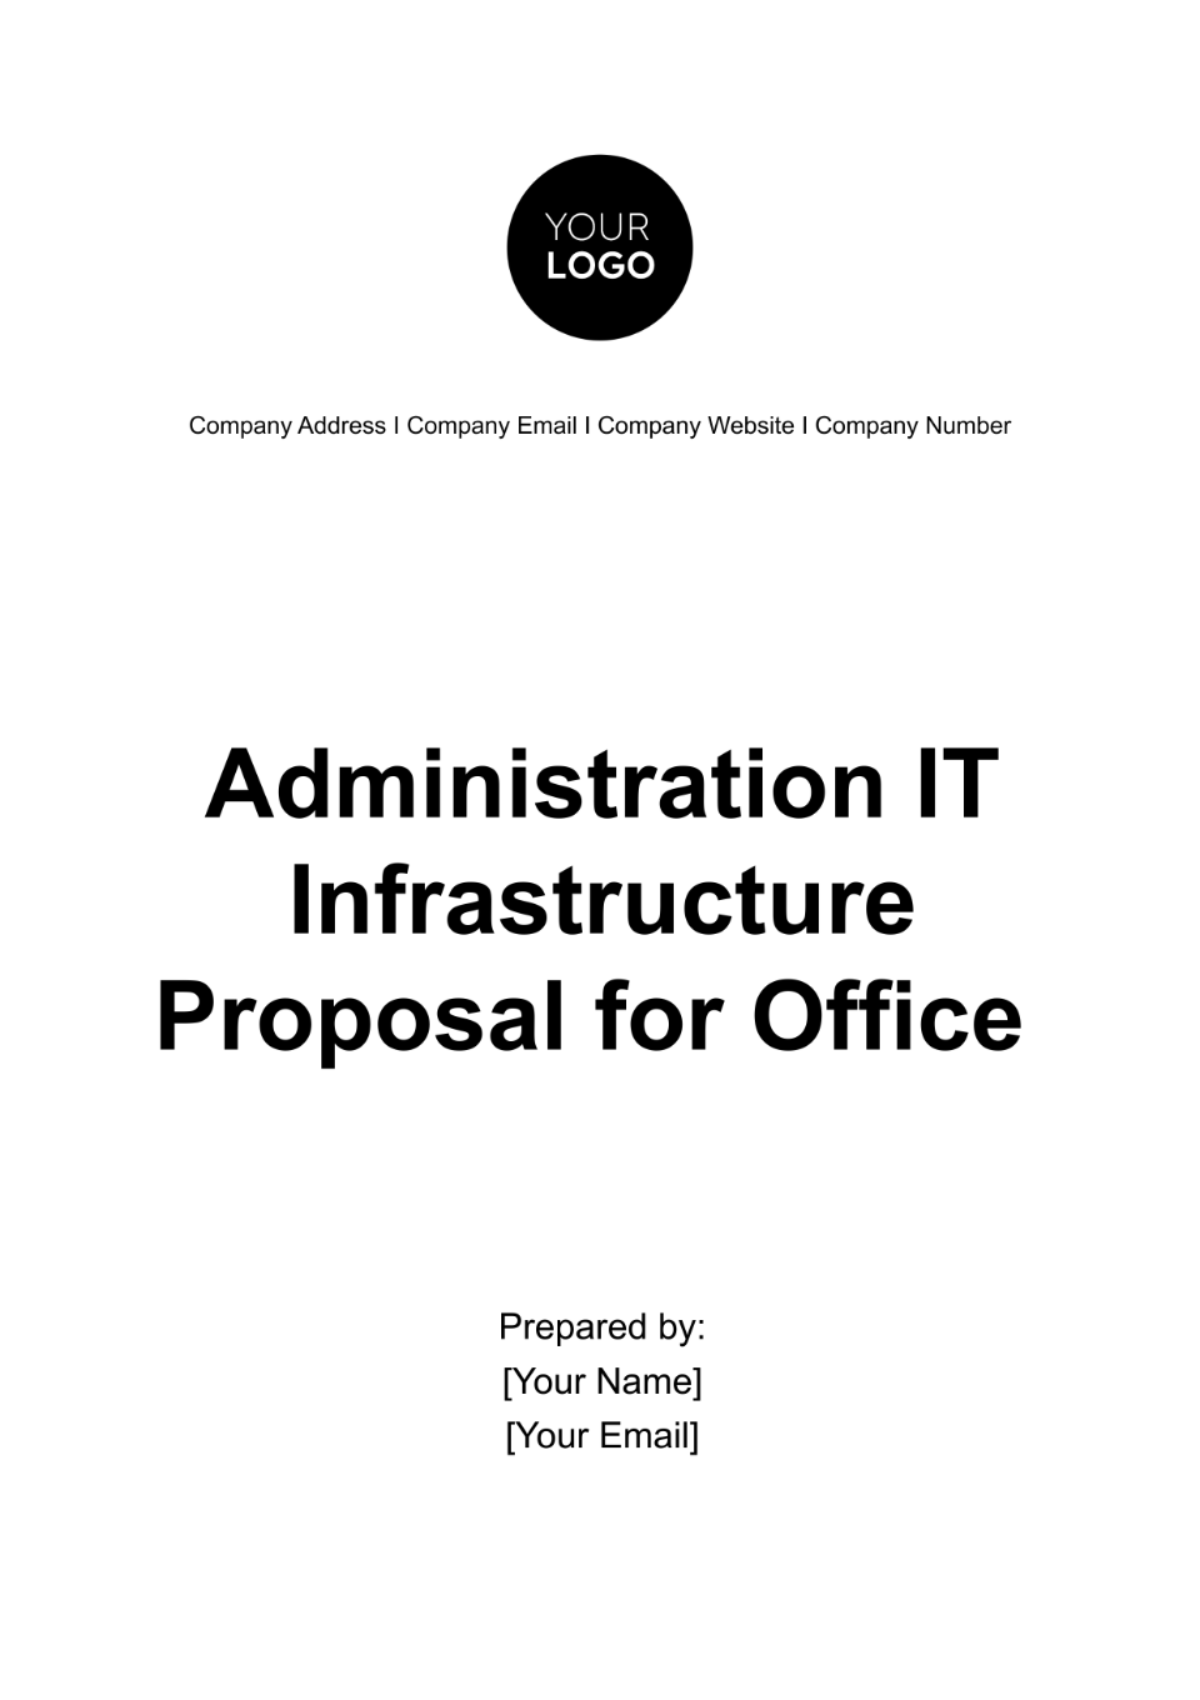 Administration IT Infrastructure Proposal for Office Template